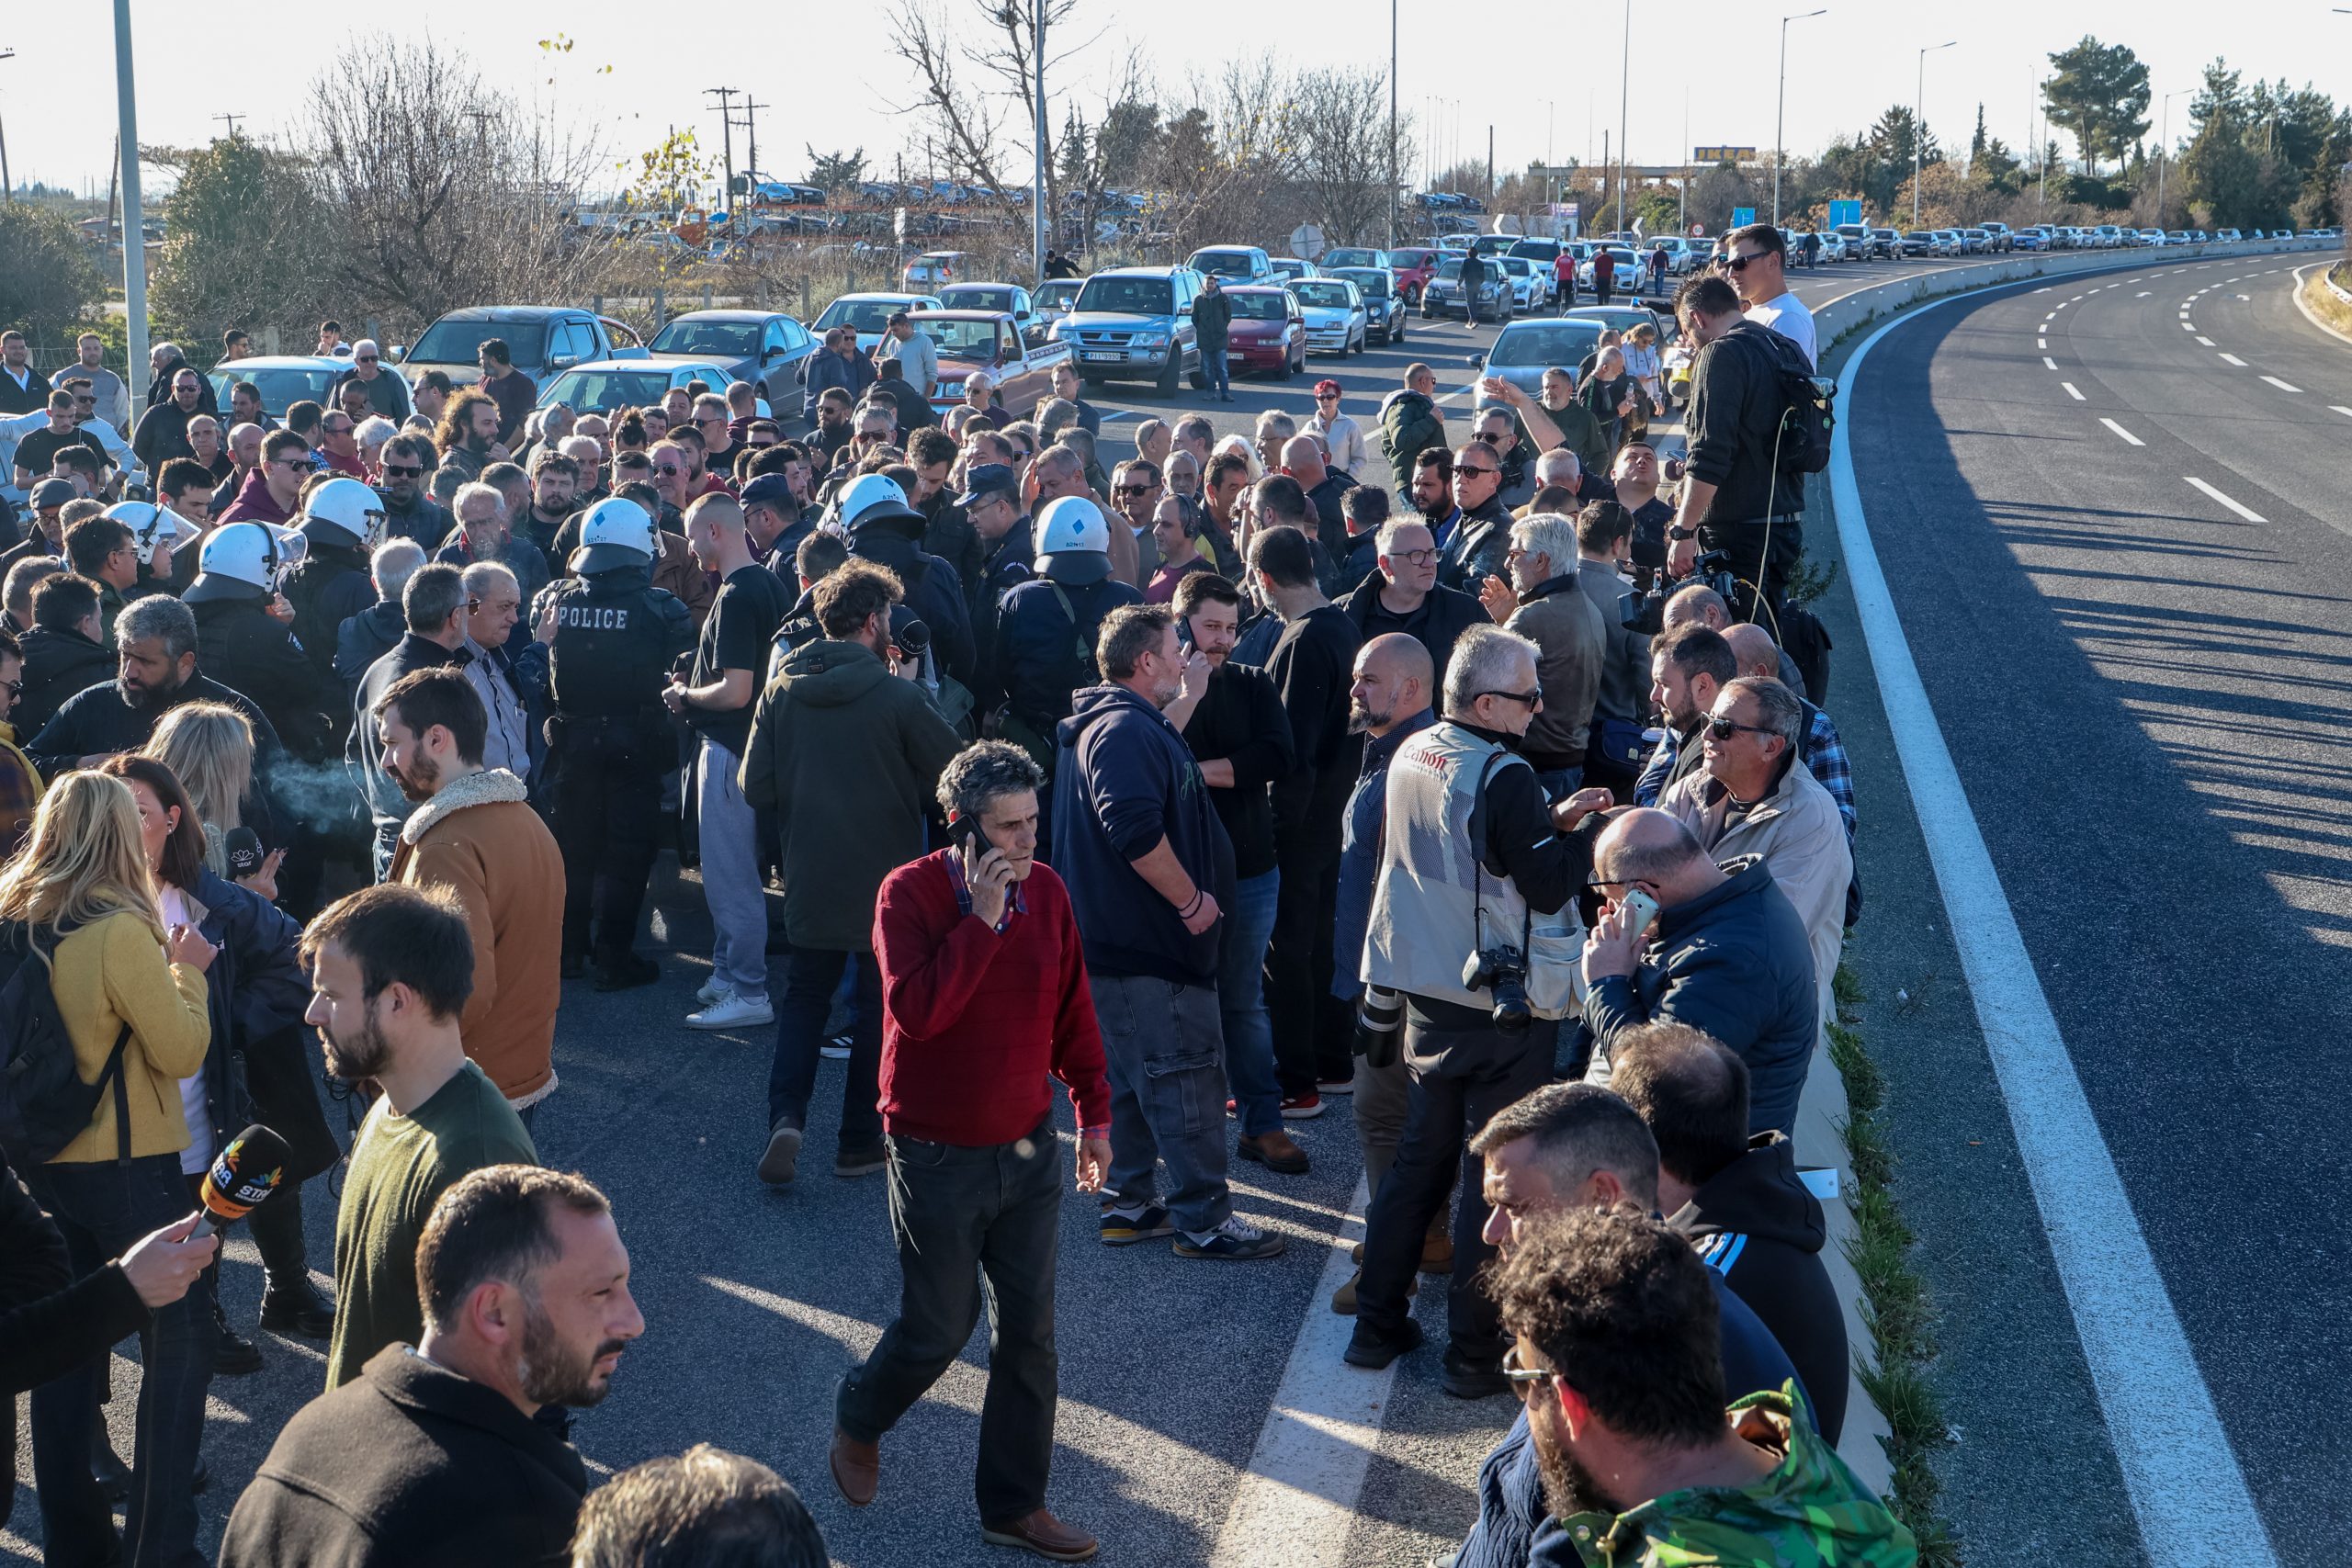 Protesting Farmers in Greece Threaten to Block Highways, Border Posts